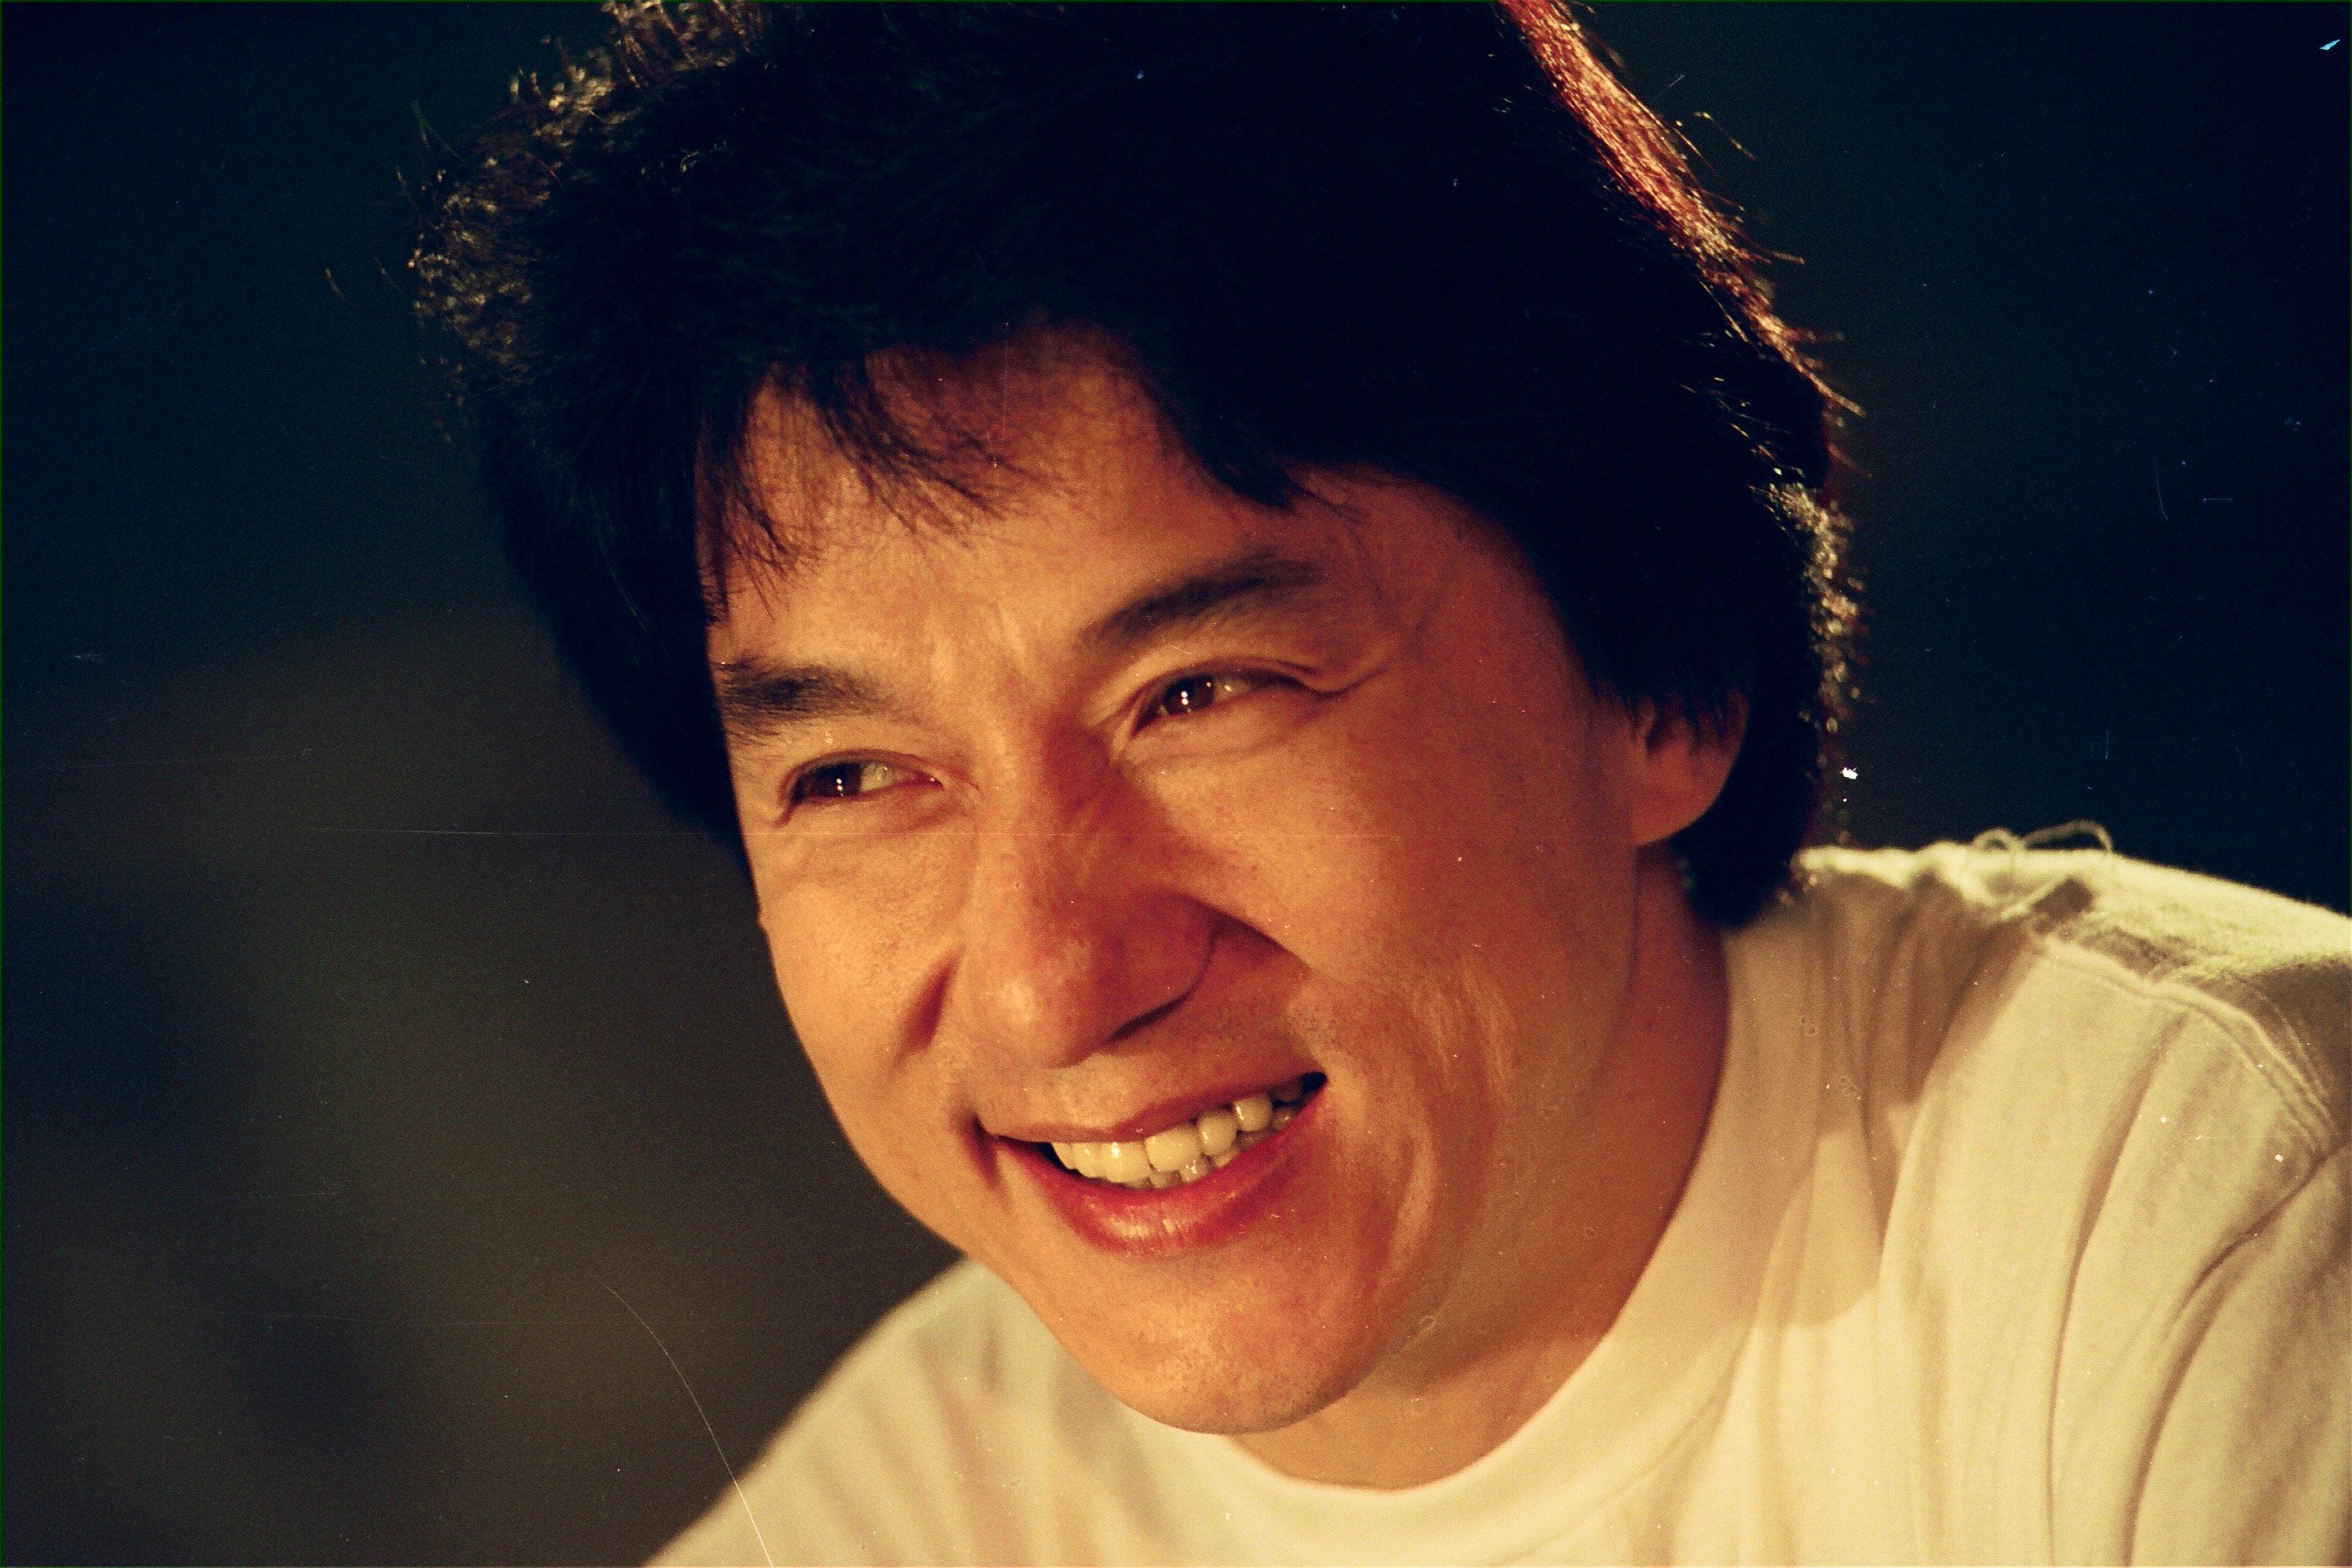 Jackie Chan, one of Hong Kong’s famous actors. His martial arts performance has made local movies famous.